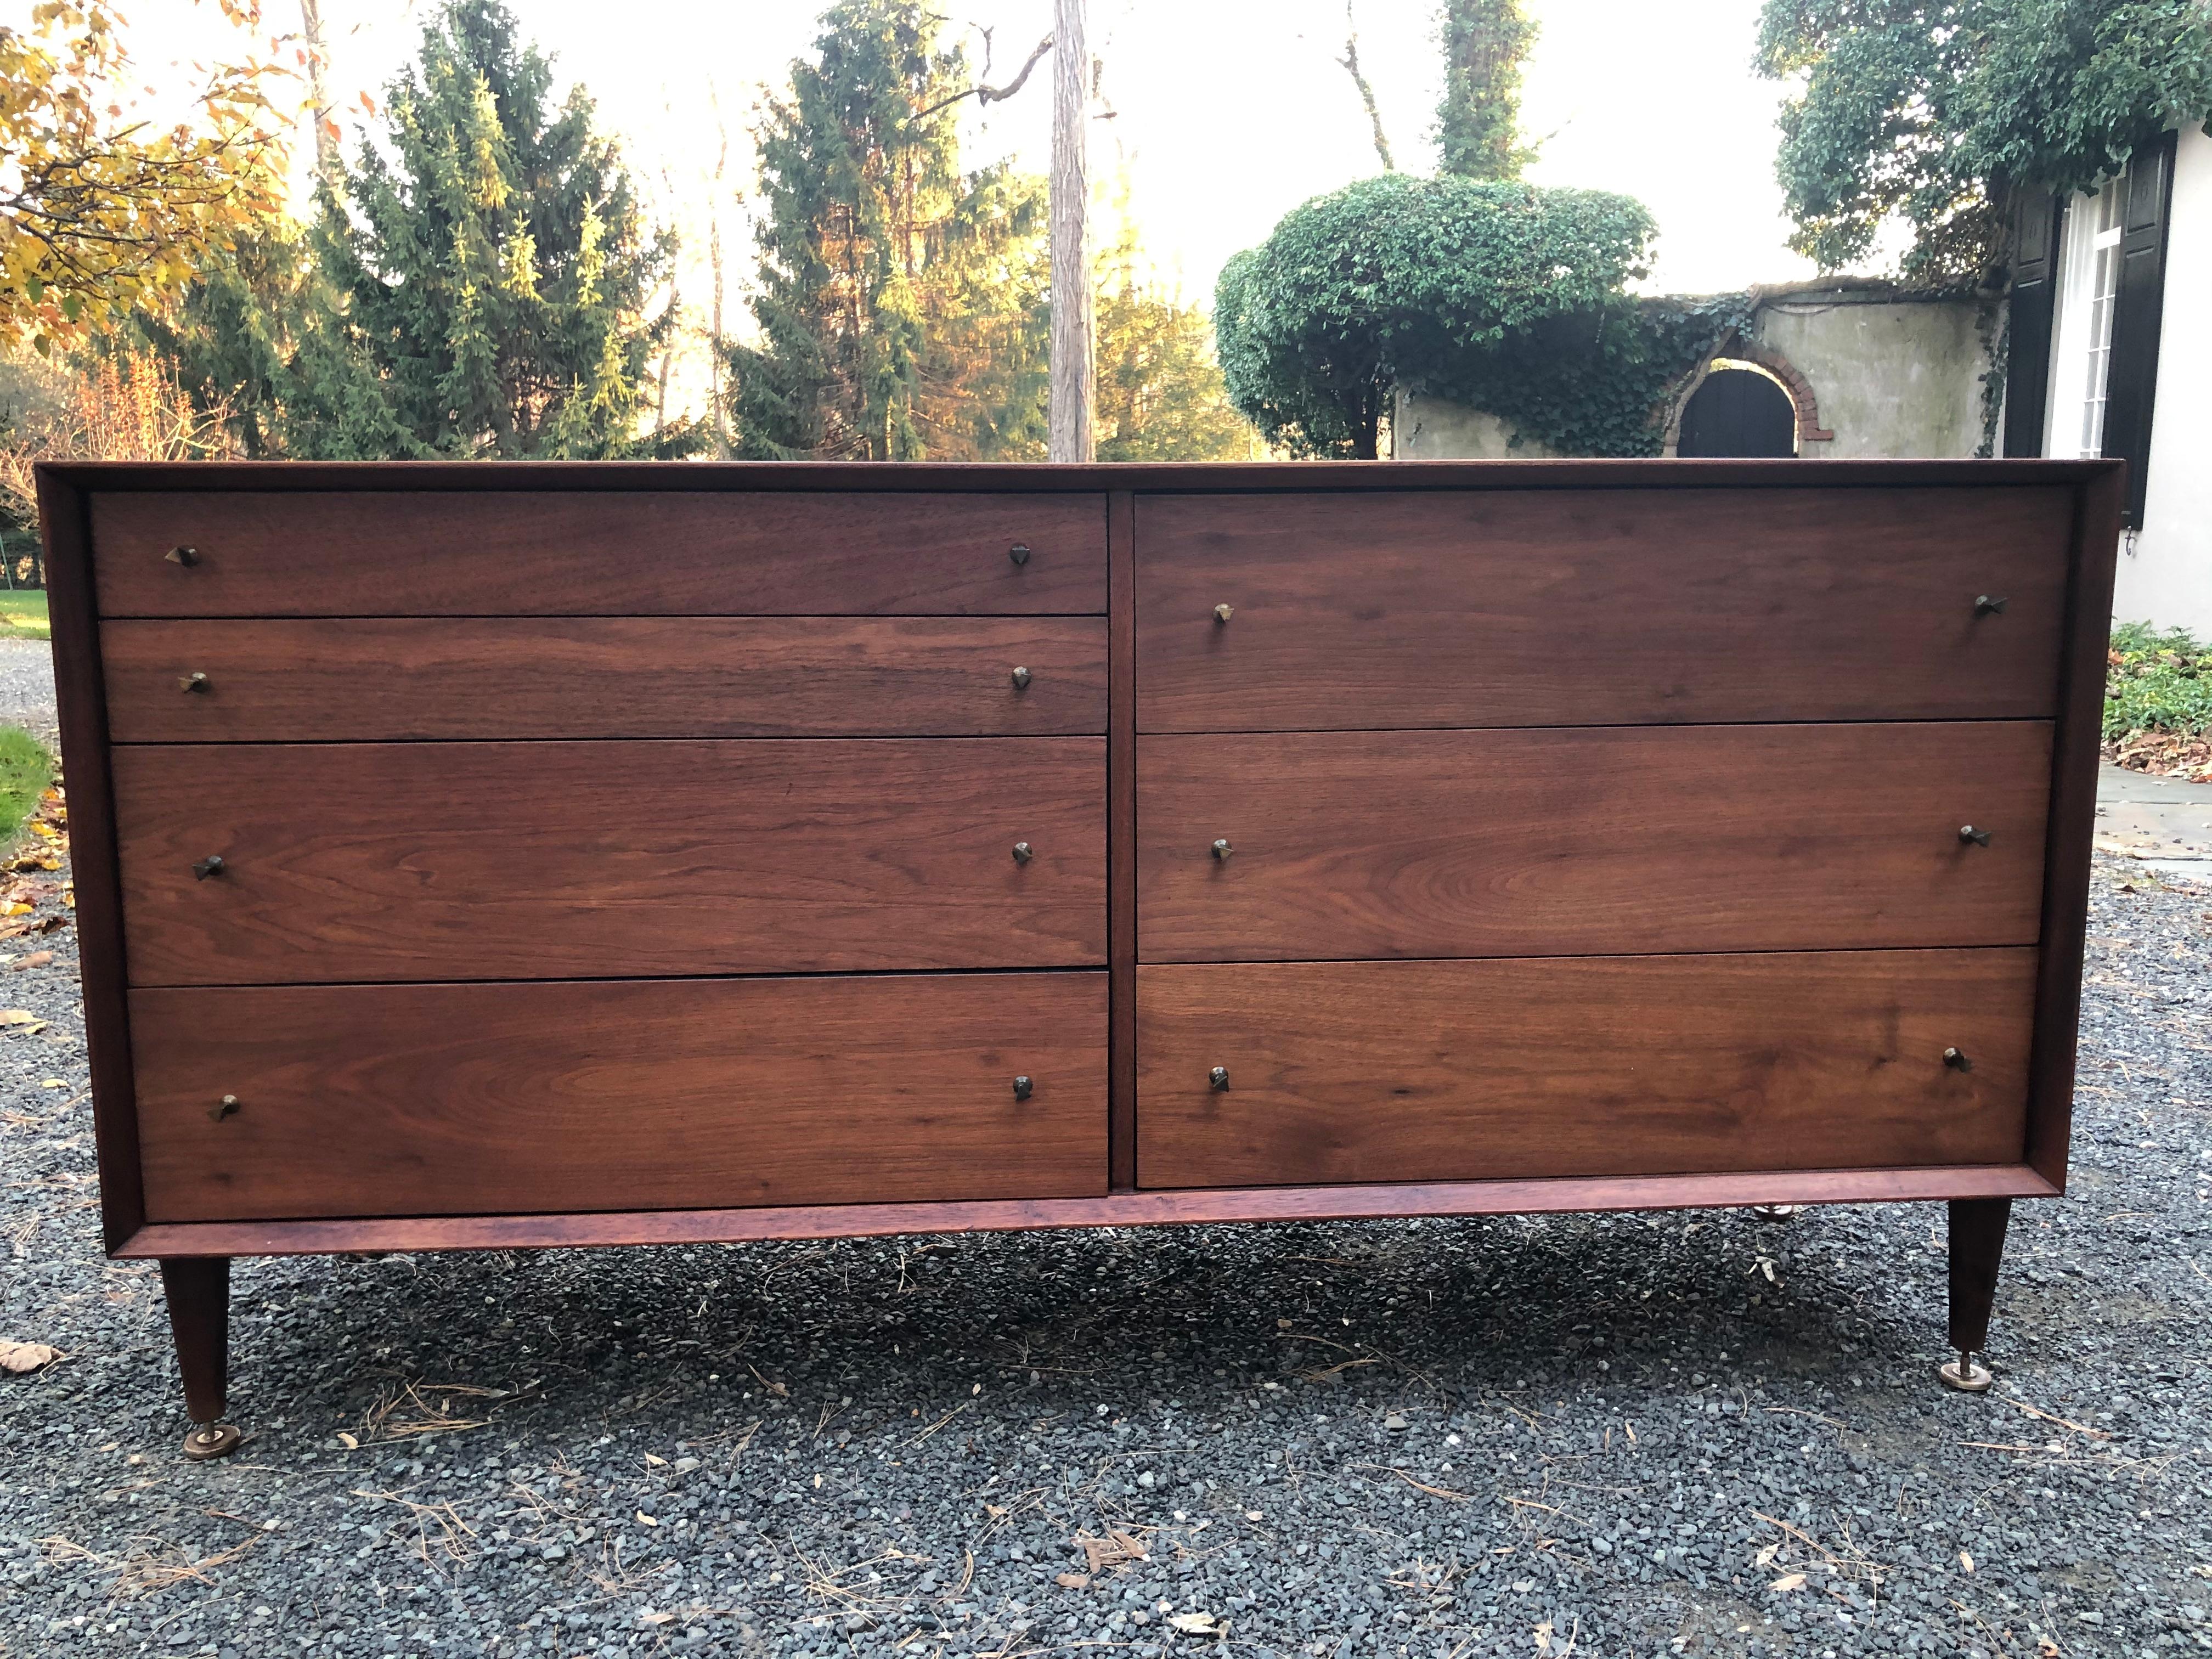 A handsome midcentury credenza dresser by renowned furniture maker Grosfeld House. Made of walnut, the credenza has a beveled frame front. The seven drawers each have metal triangular pulls and the edges of each drawer have a matte black finish. The